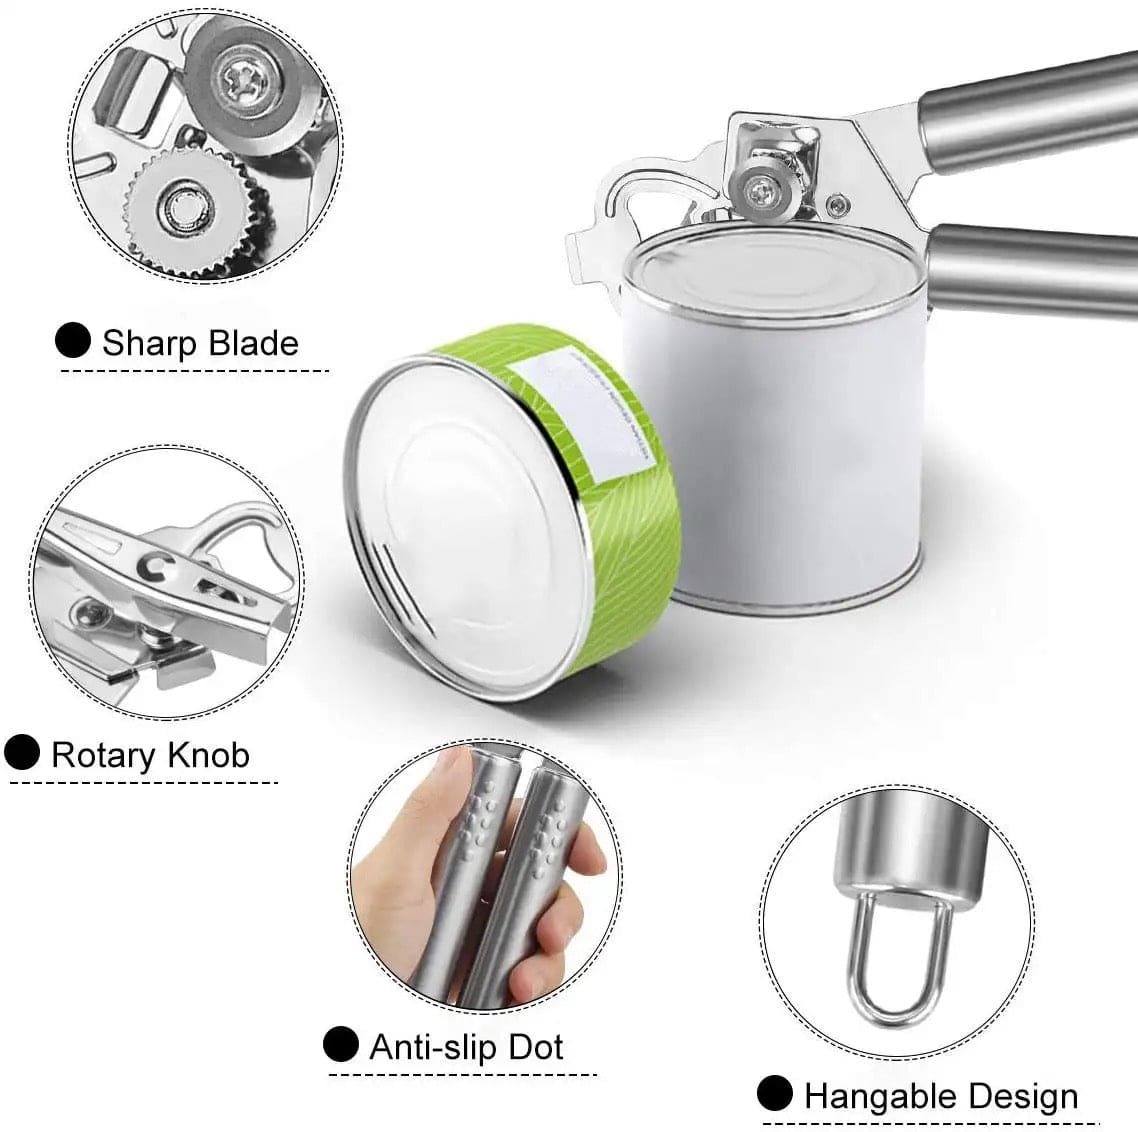 3 In 1 Manual Can Opener, Stainless Steel Heavy Duty Can Opener, Multifunctional Jar Opener, Portable Kitchen Tool, Professional Effortless Openers with Turn Knob Bar